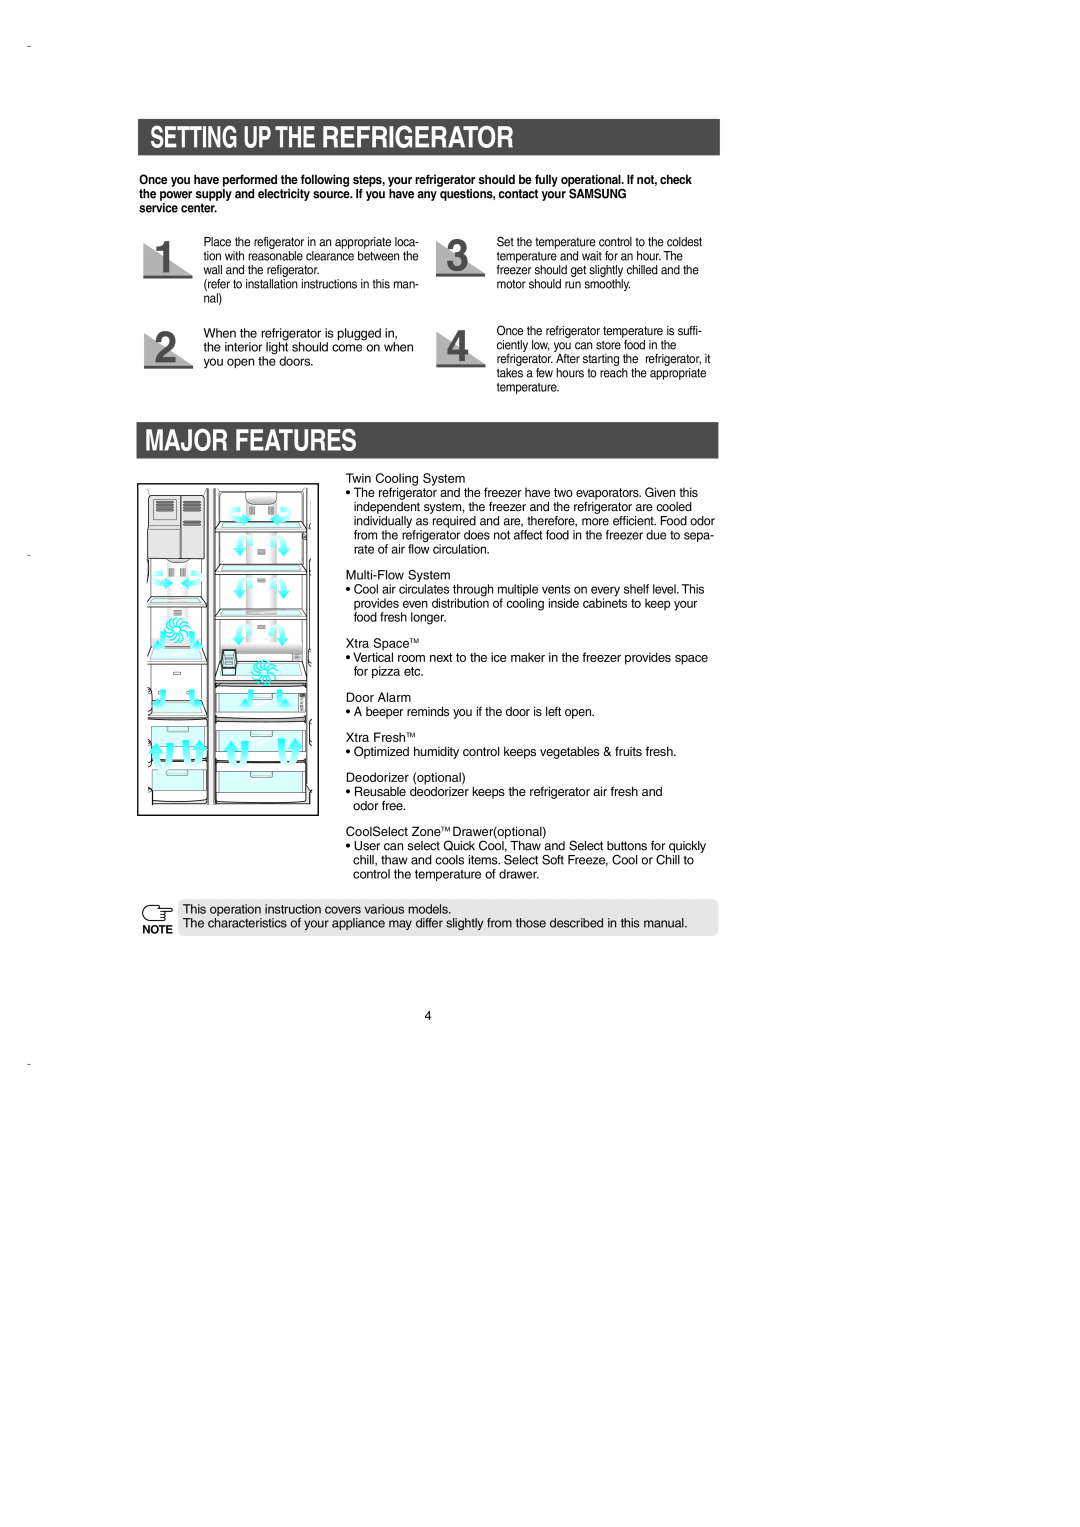 Samsung DA99-00275B owner manual Setting Up The Refrigerator, Major Features, service center 